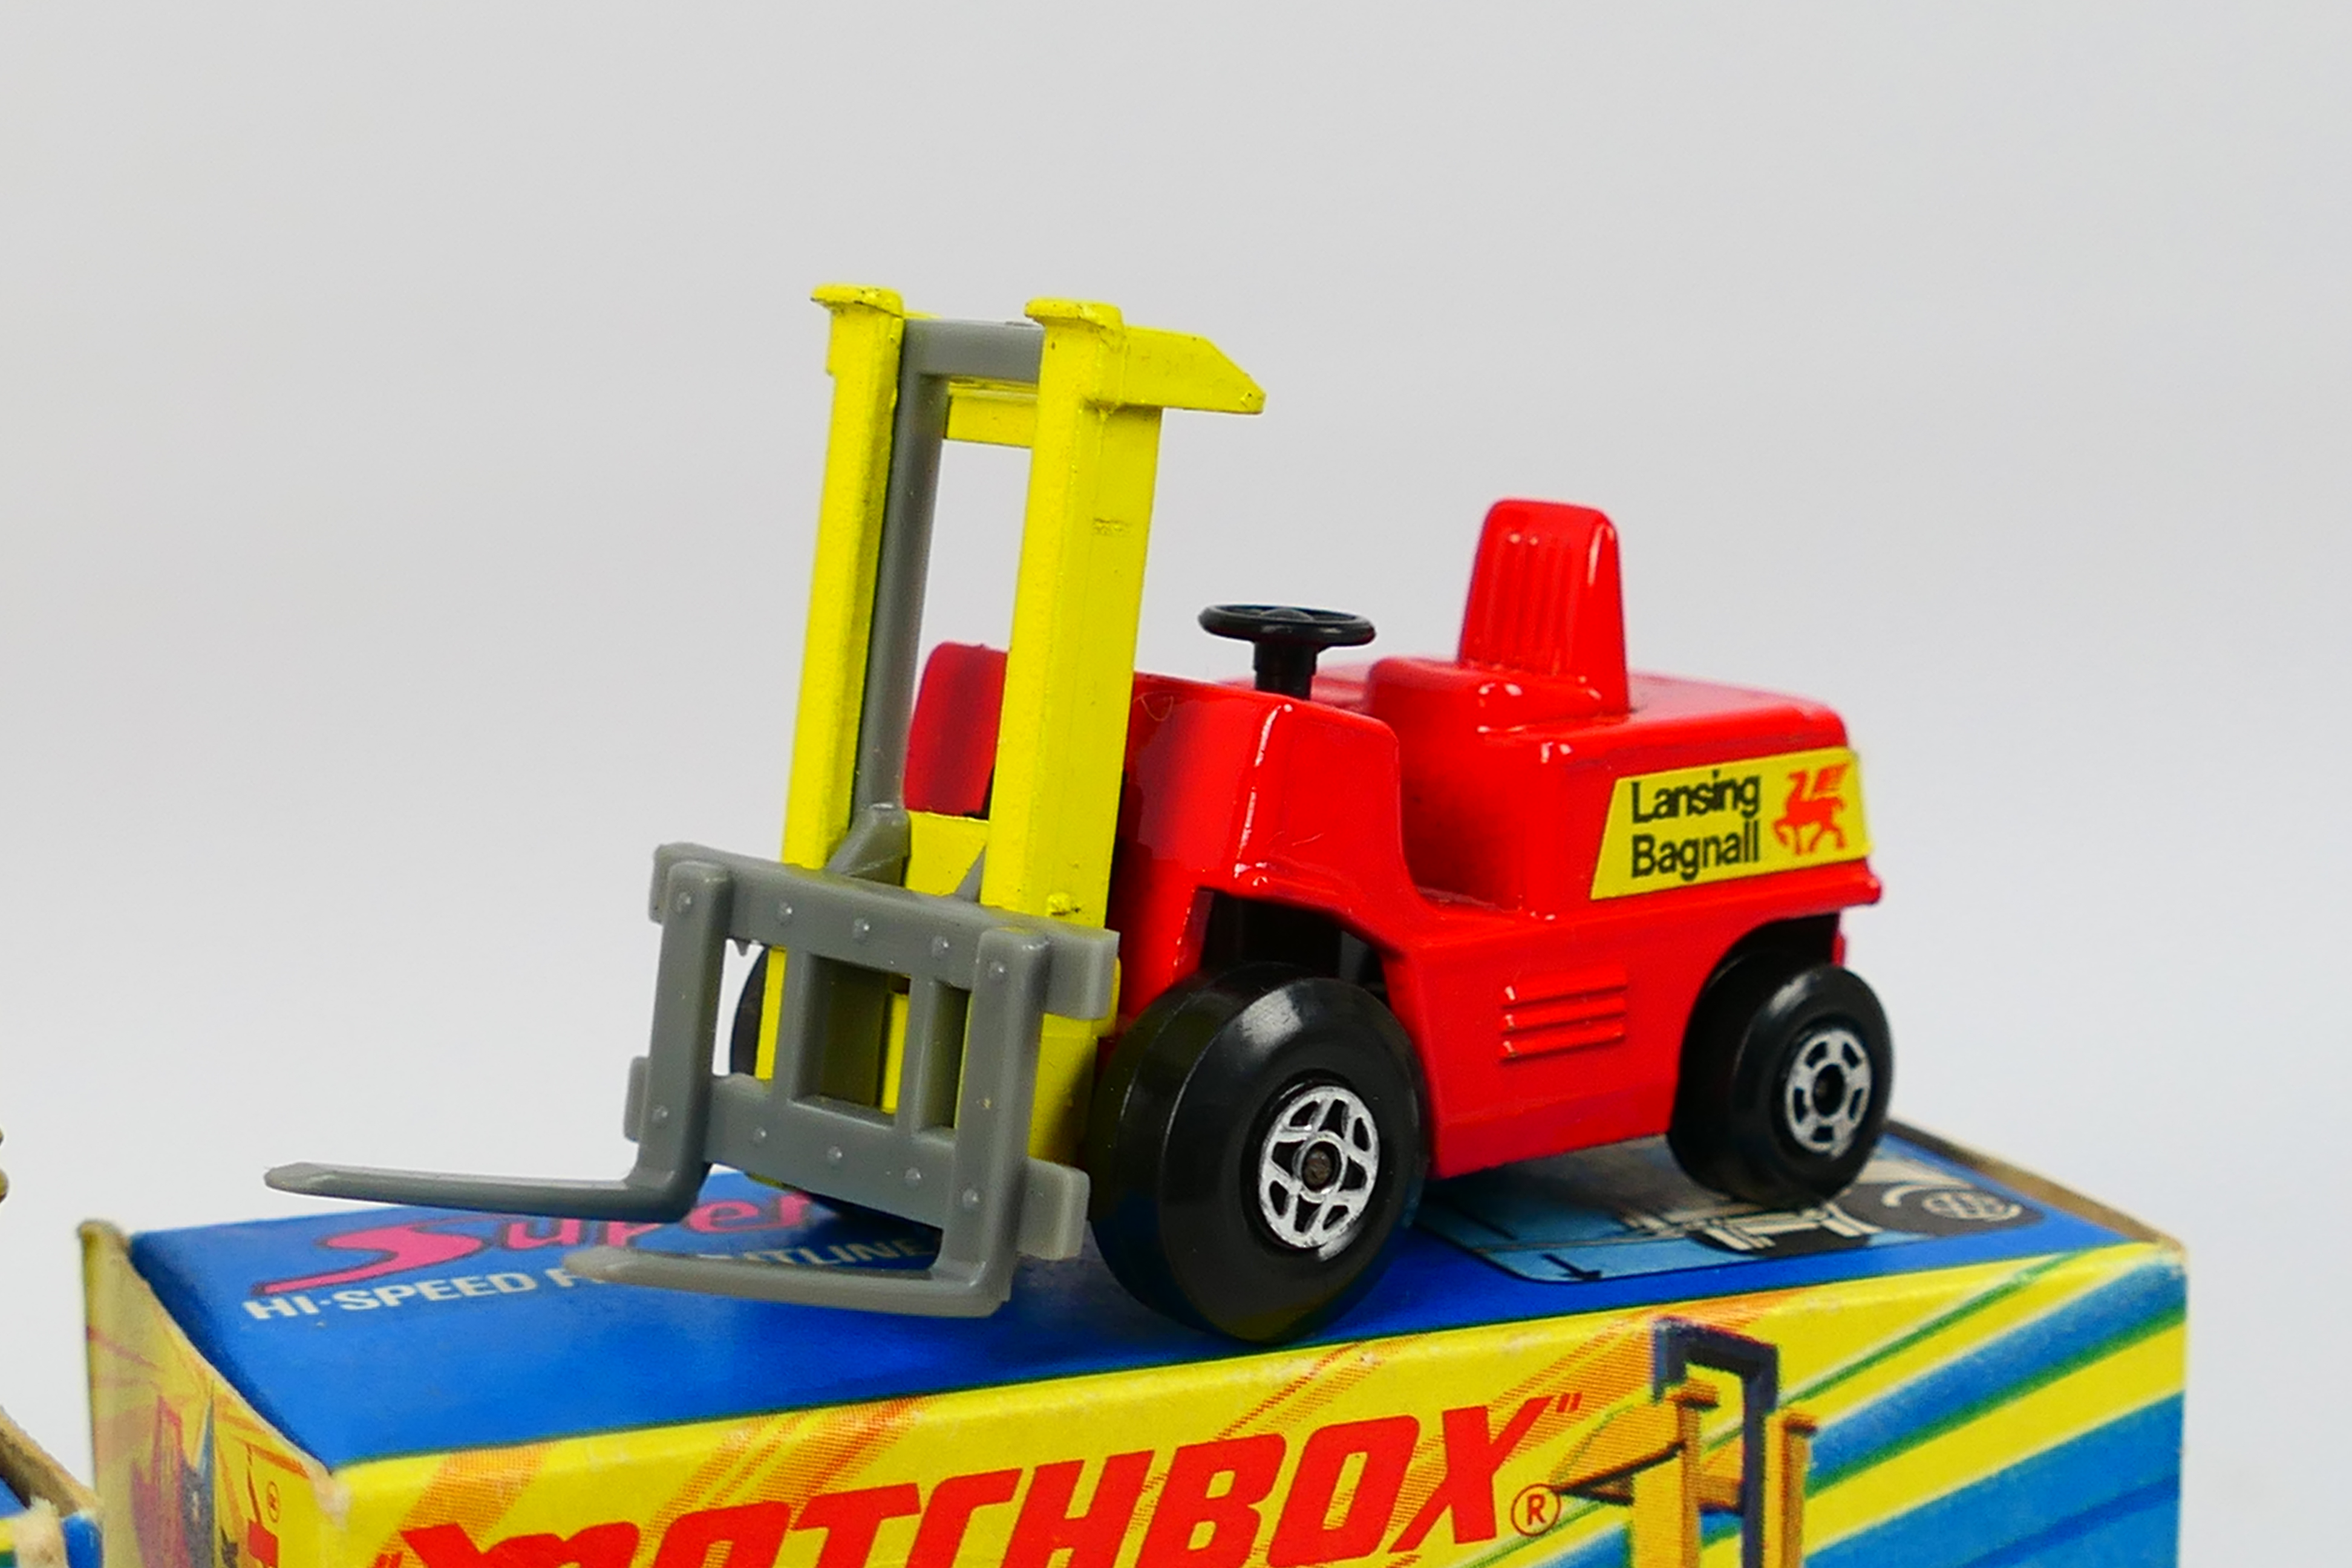 Matchbox - Superfast - 3 x boxed models, Setra Coach # 12, - Image 4 of 6